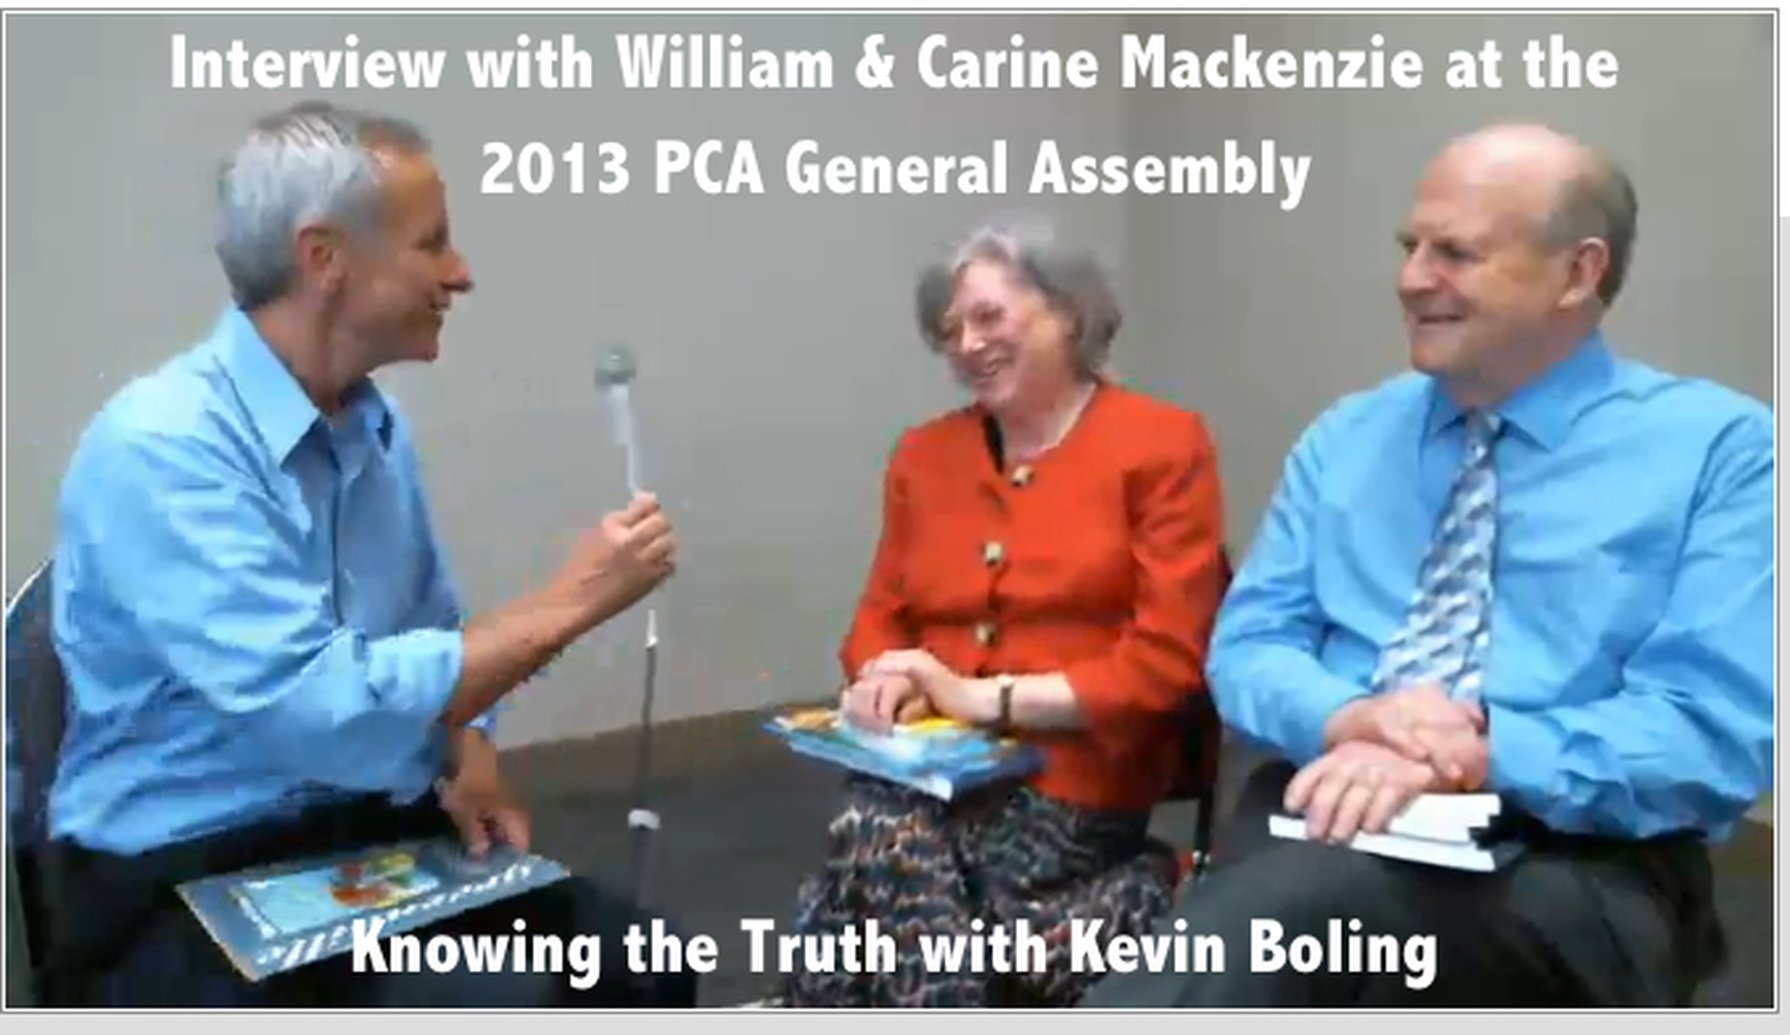 Interview with William & Carine Mackenzie at the 2013 PCA General Assembly